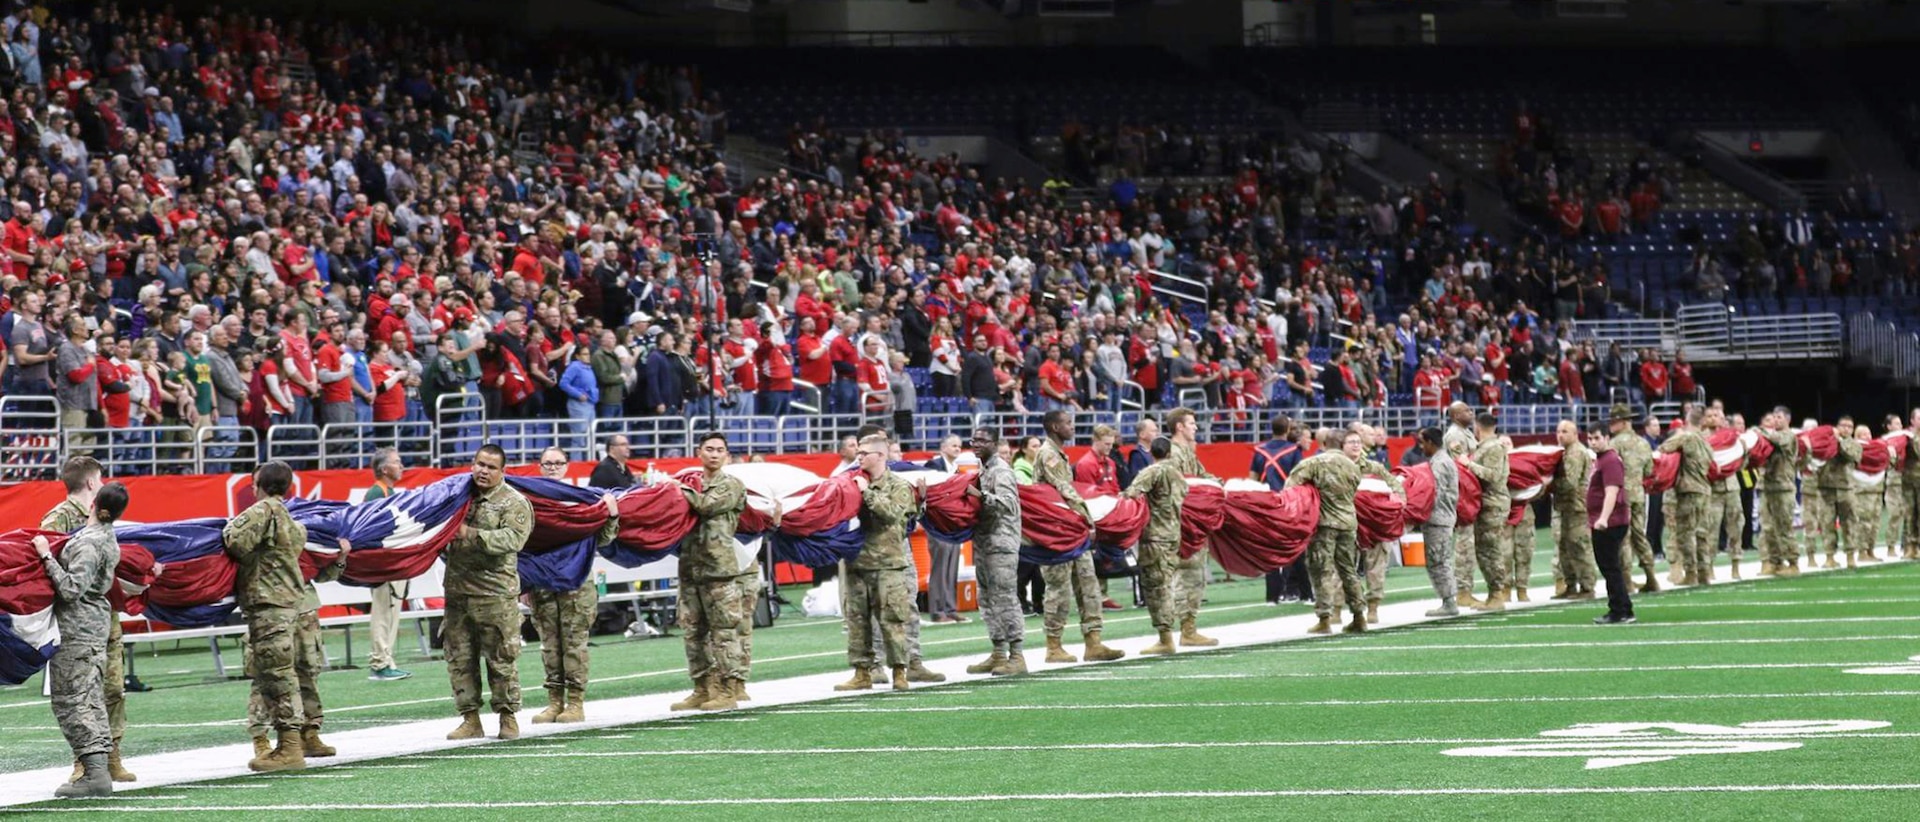 To honor military members past and present, service members from across Joint Base San Antonio, as well as ROTC cadets from the University of Texas at San Antonio, presented the American flag during the National Anthem at the San Antonio Commanders football game at the Alamodome in downtown San Antonio March 31. More than 100 Service members and cadets participated in the flag-holding ceremony to open Sunday's game.